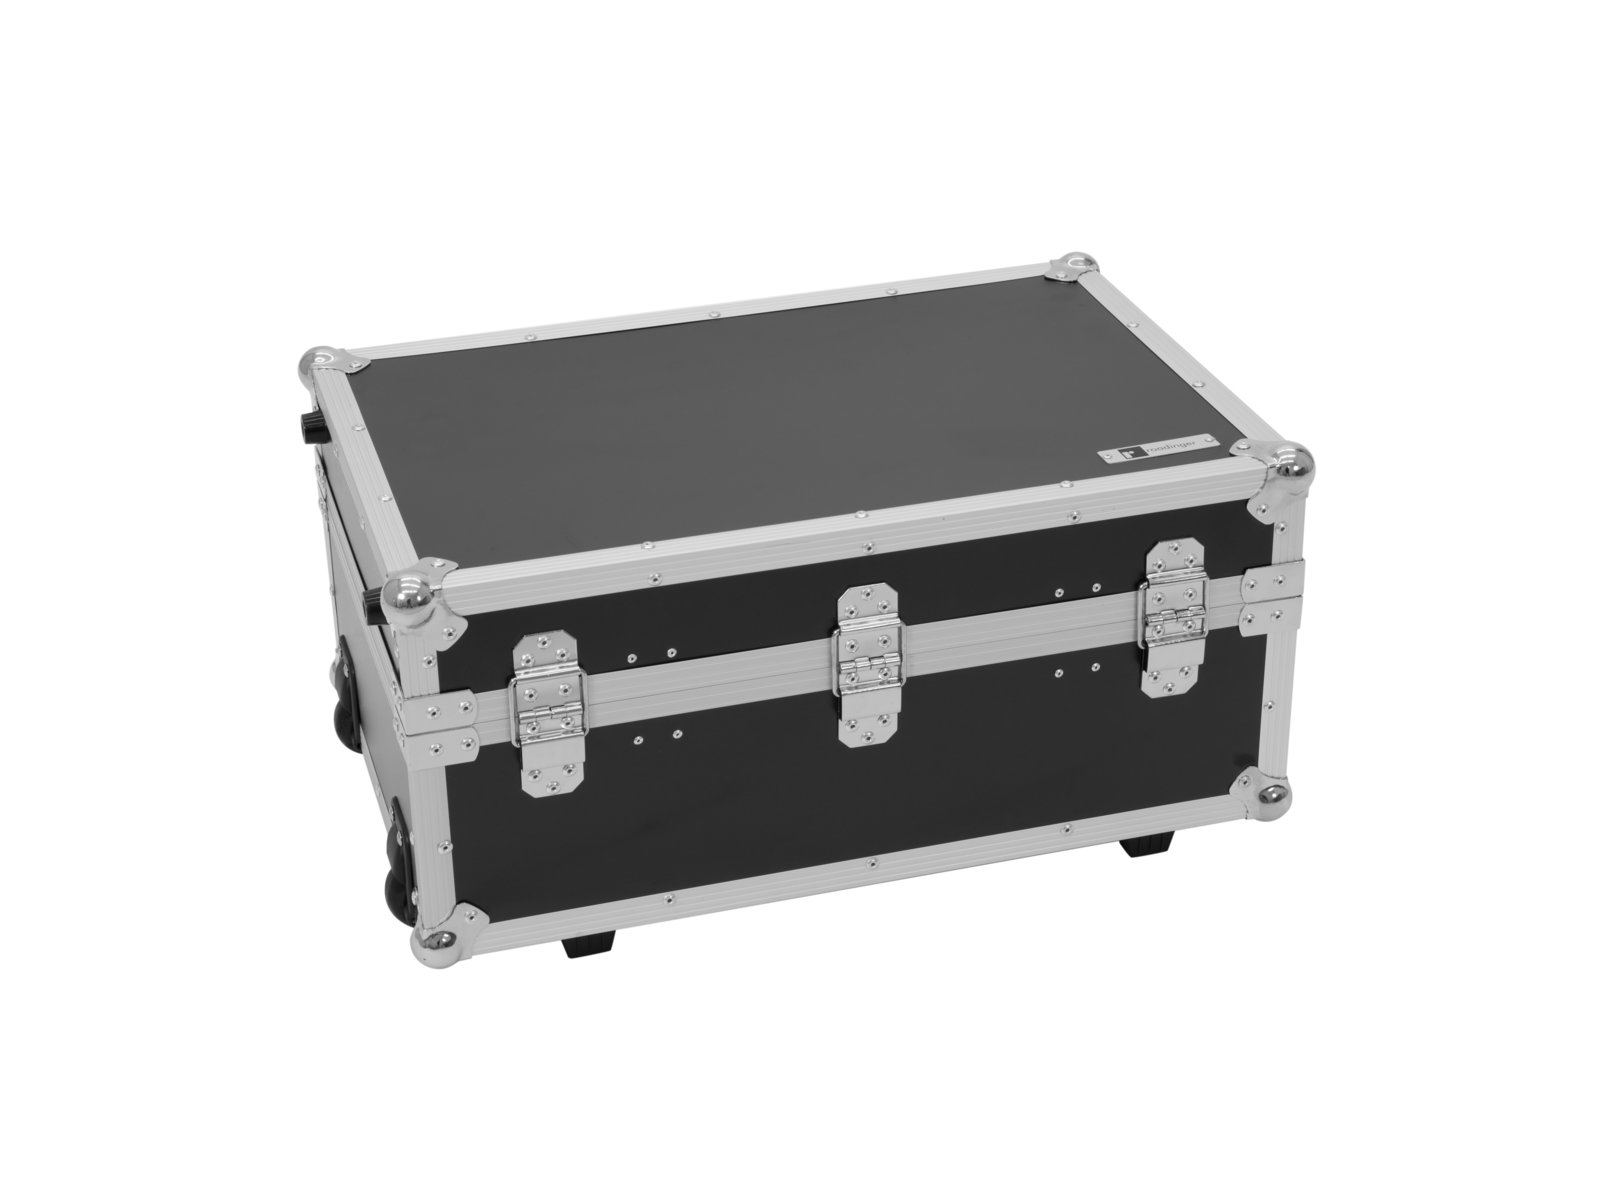 ROADINGER Universal Case UKC-1 with Trolley